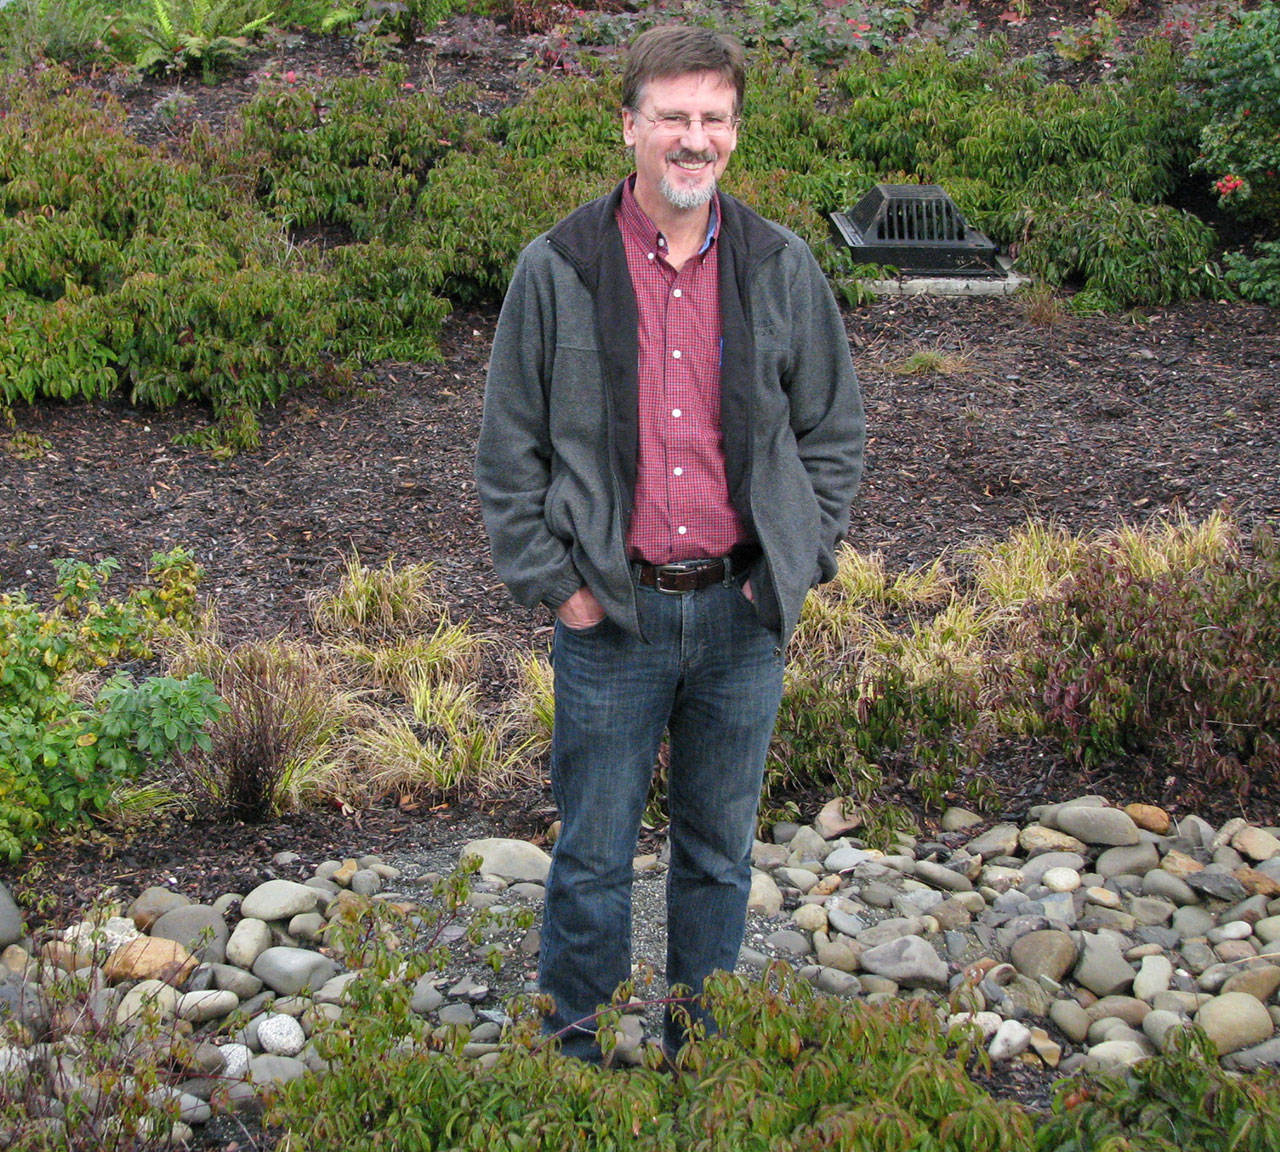 Joe Holtrop, Clallam Conservation District Executive Director, provides information about landscaping with native plants today, Nov. 12, as part of the Green Thumbs Garden Tips education series.